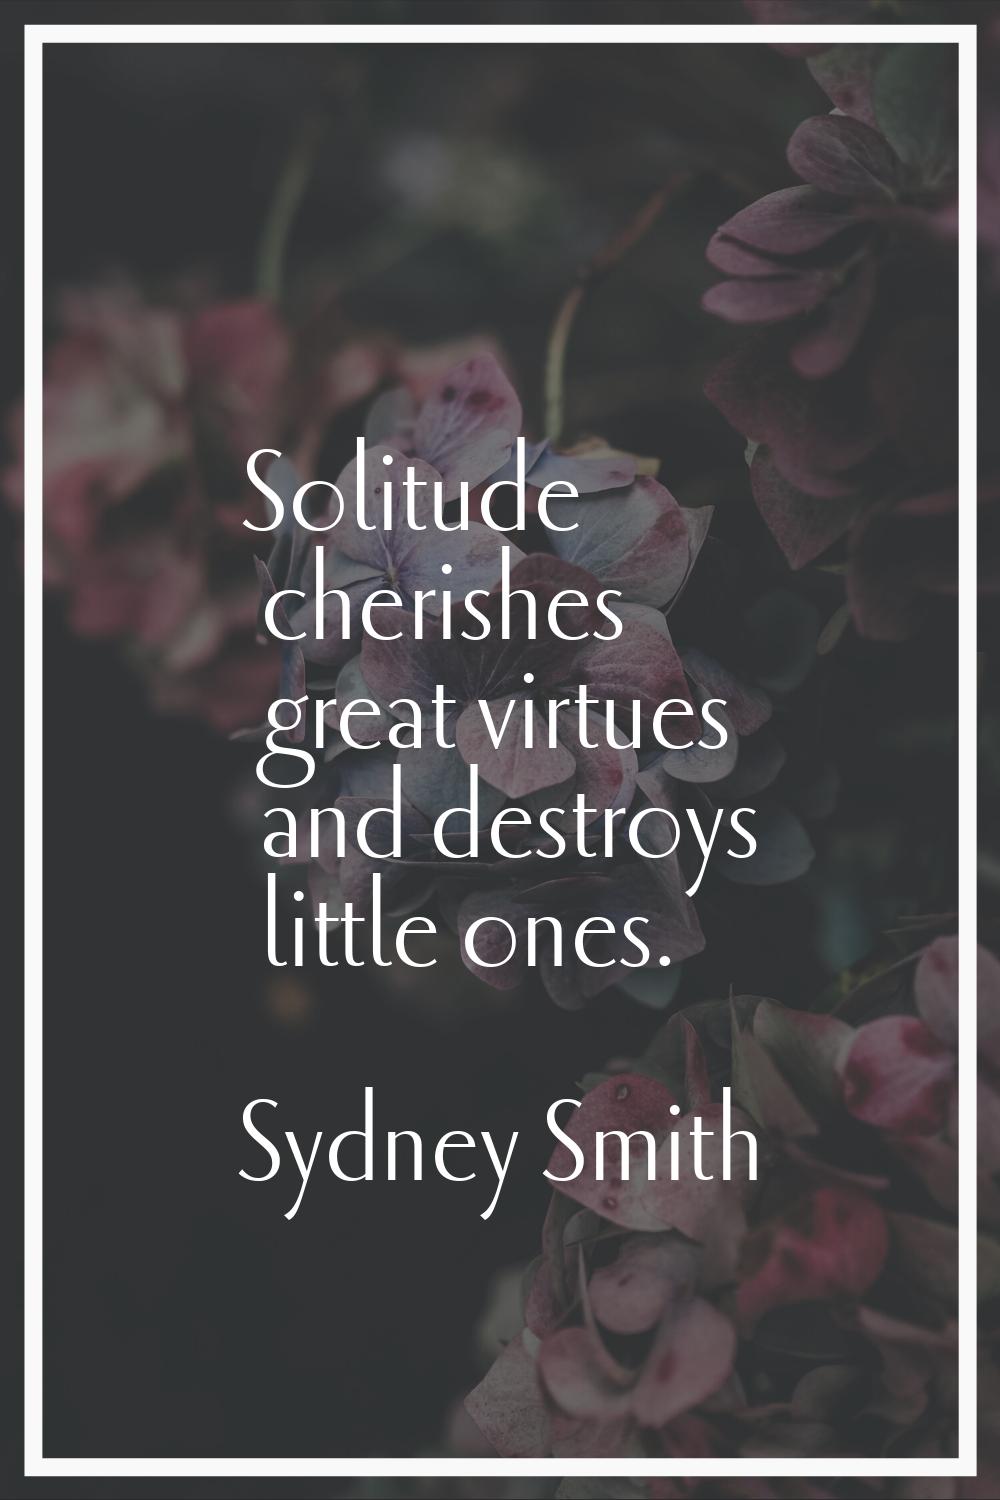 Solitude cherishes great virtues and destroys little ones.